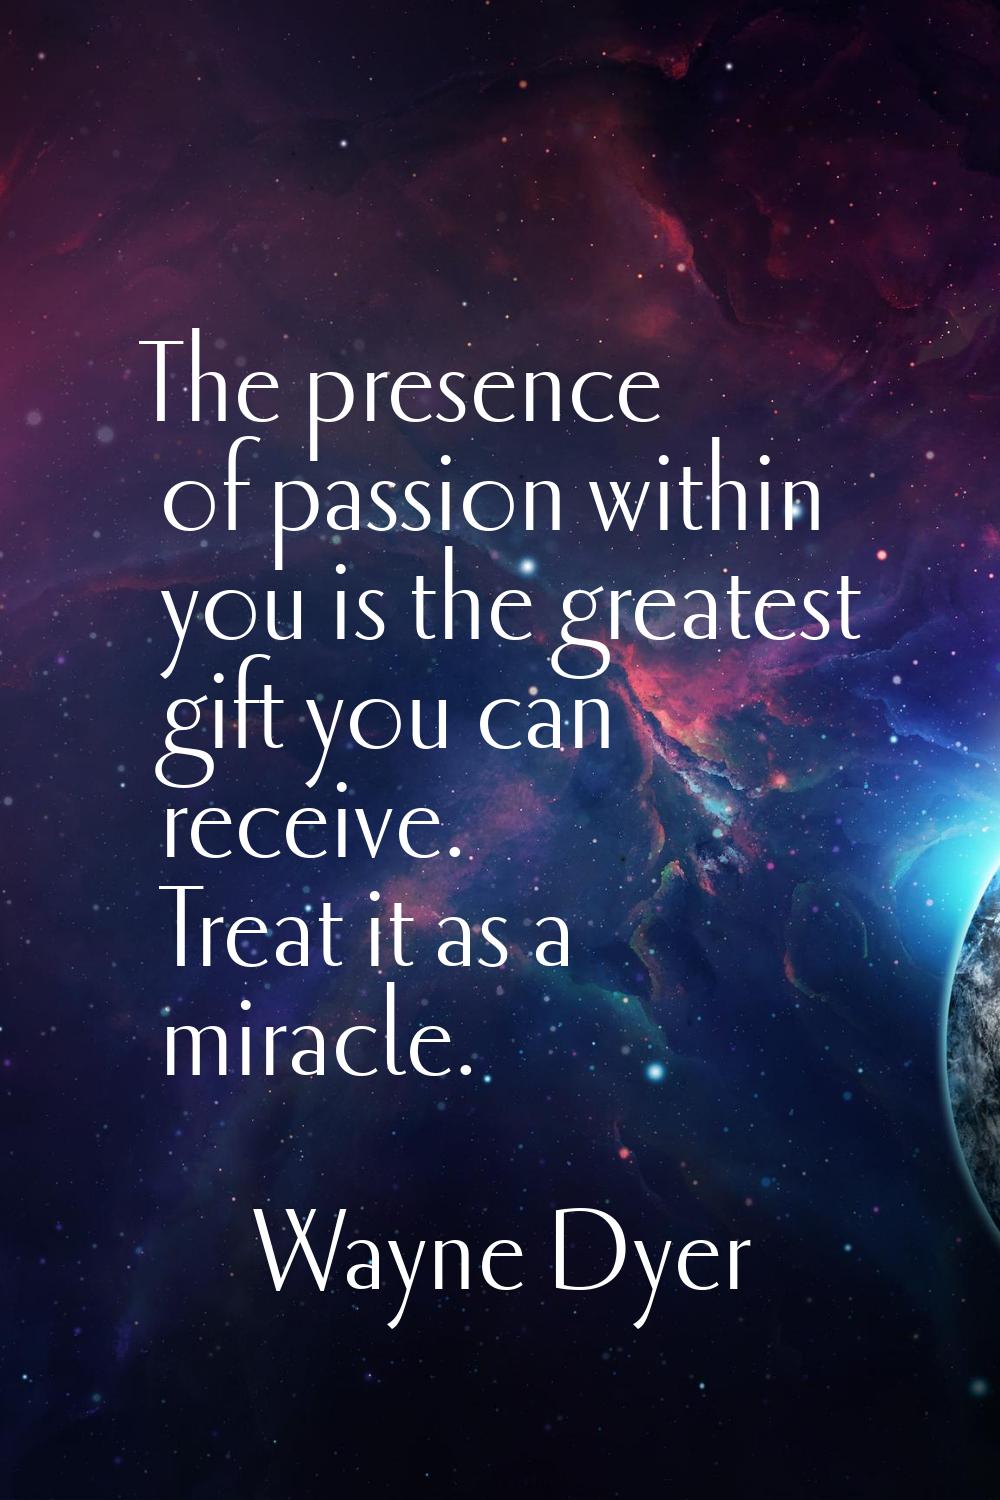 The presence of passion within you is the greatest gift you can receive. Treat it as a miracle.